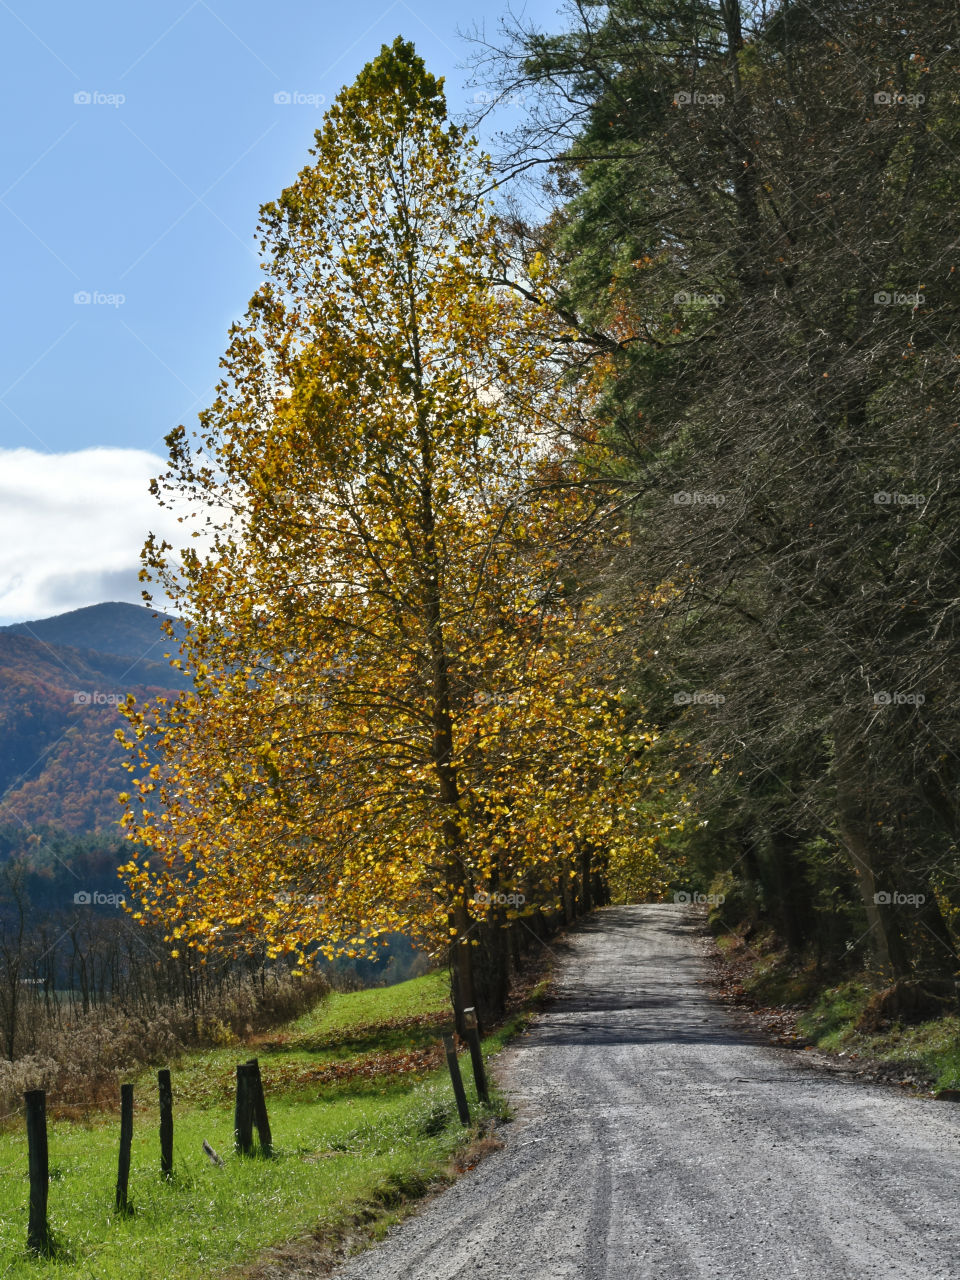 Fall in Cades Cove, Smoky Mountain 